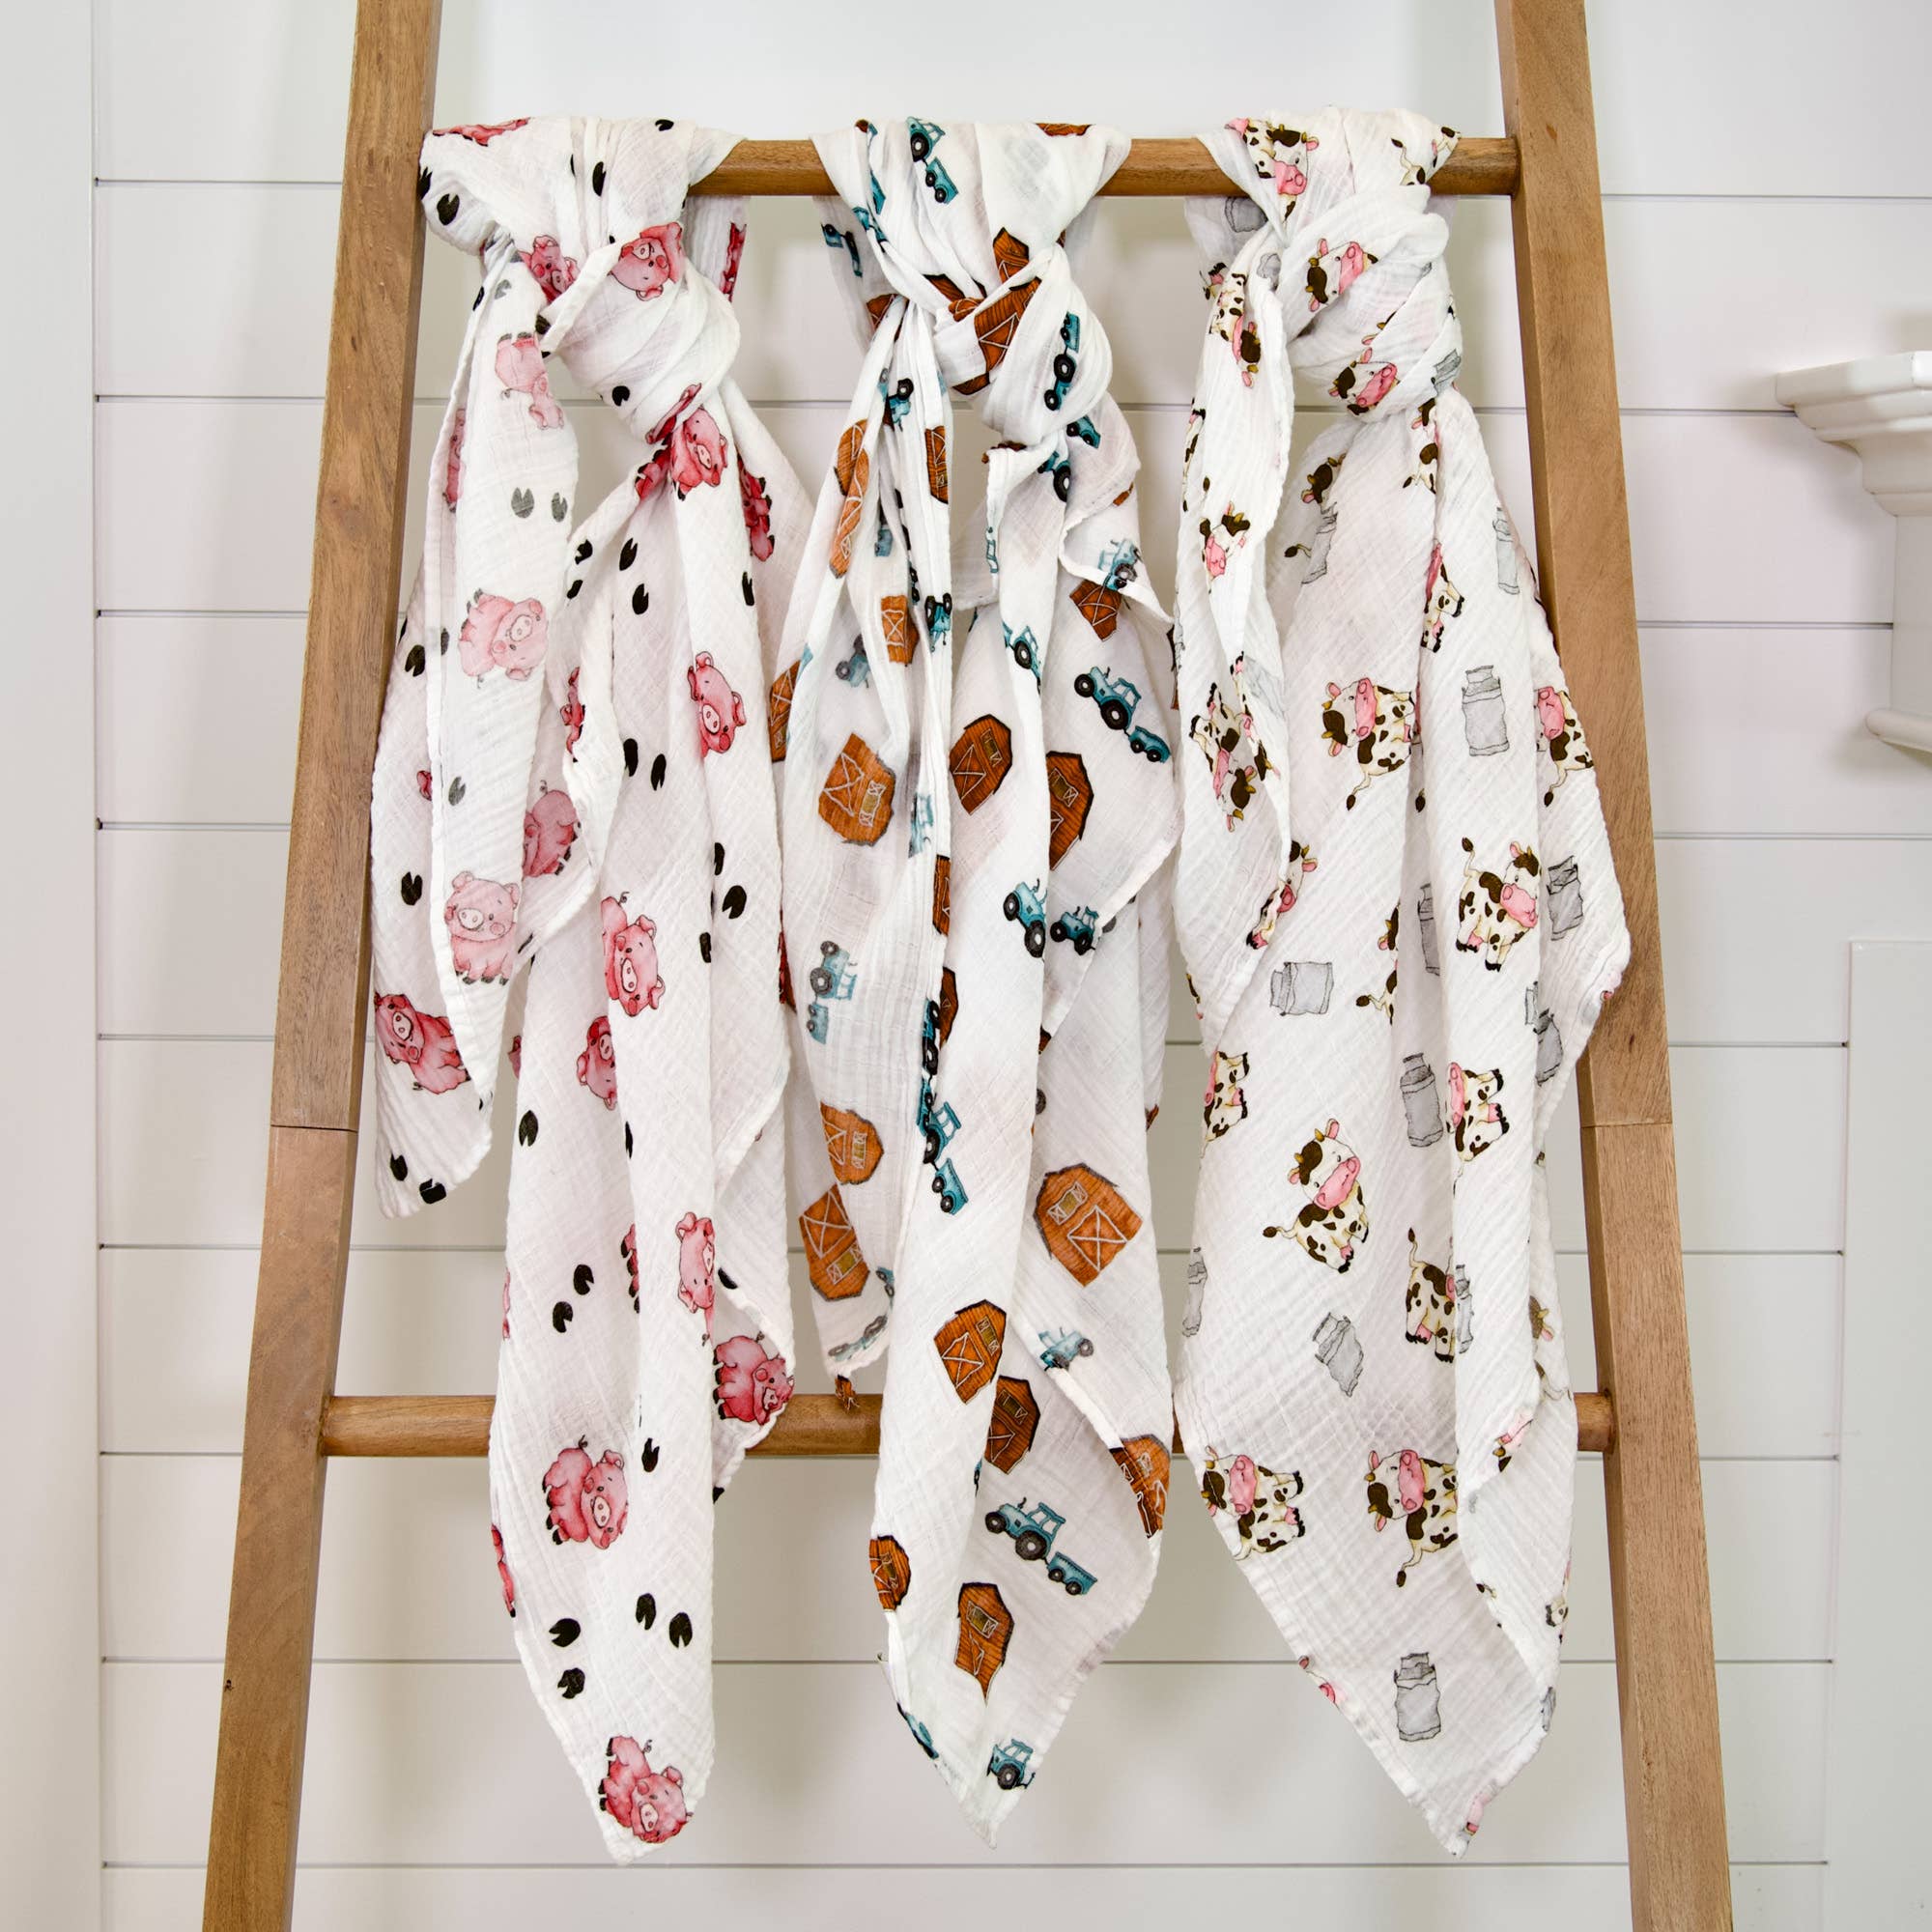 LollyBanks - The Cow Says Moo - Baby Swaddle Blanket Set